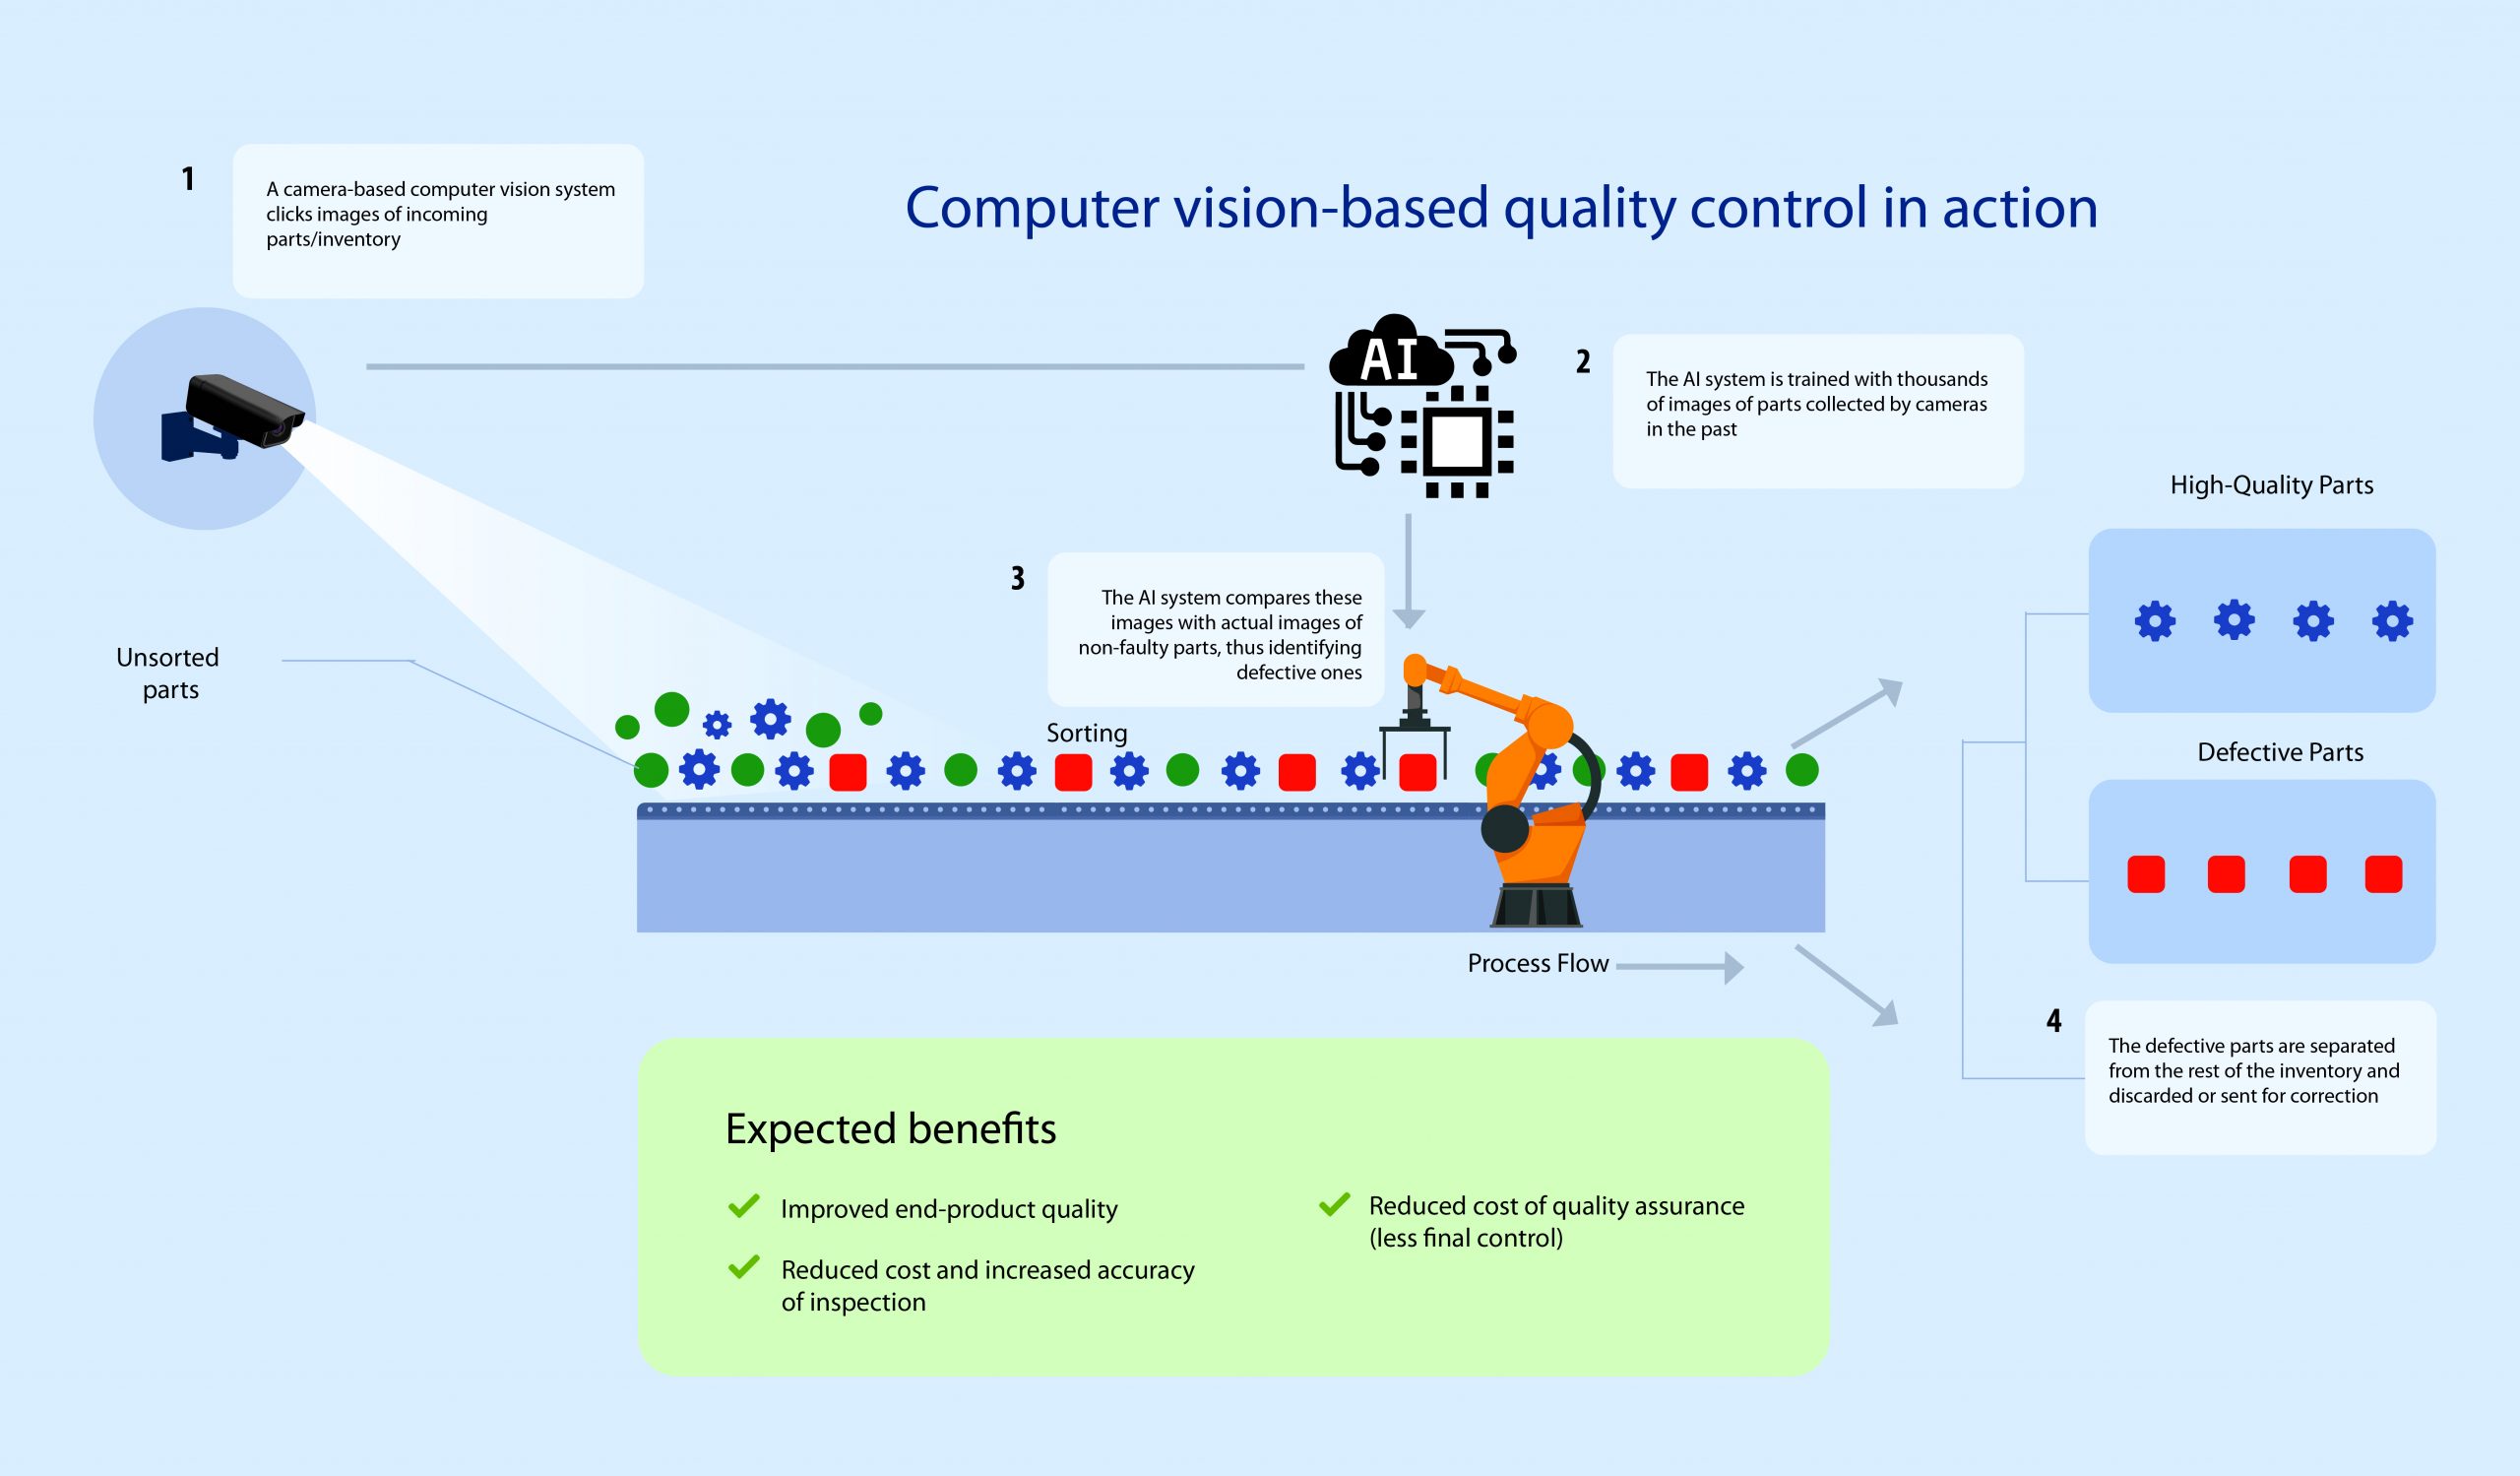 Computer vision-based quality control